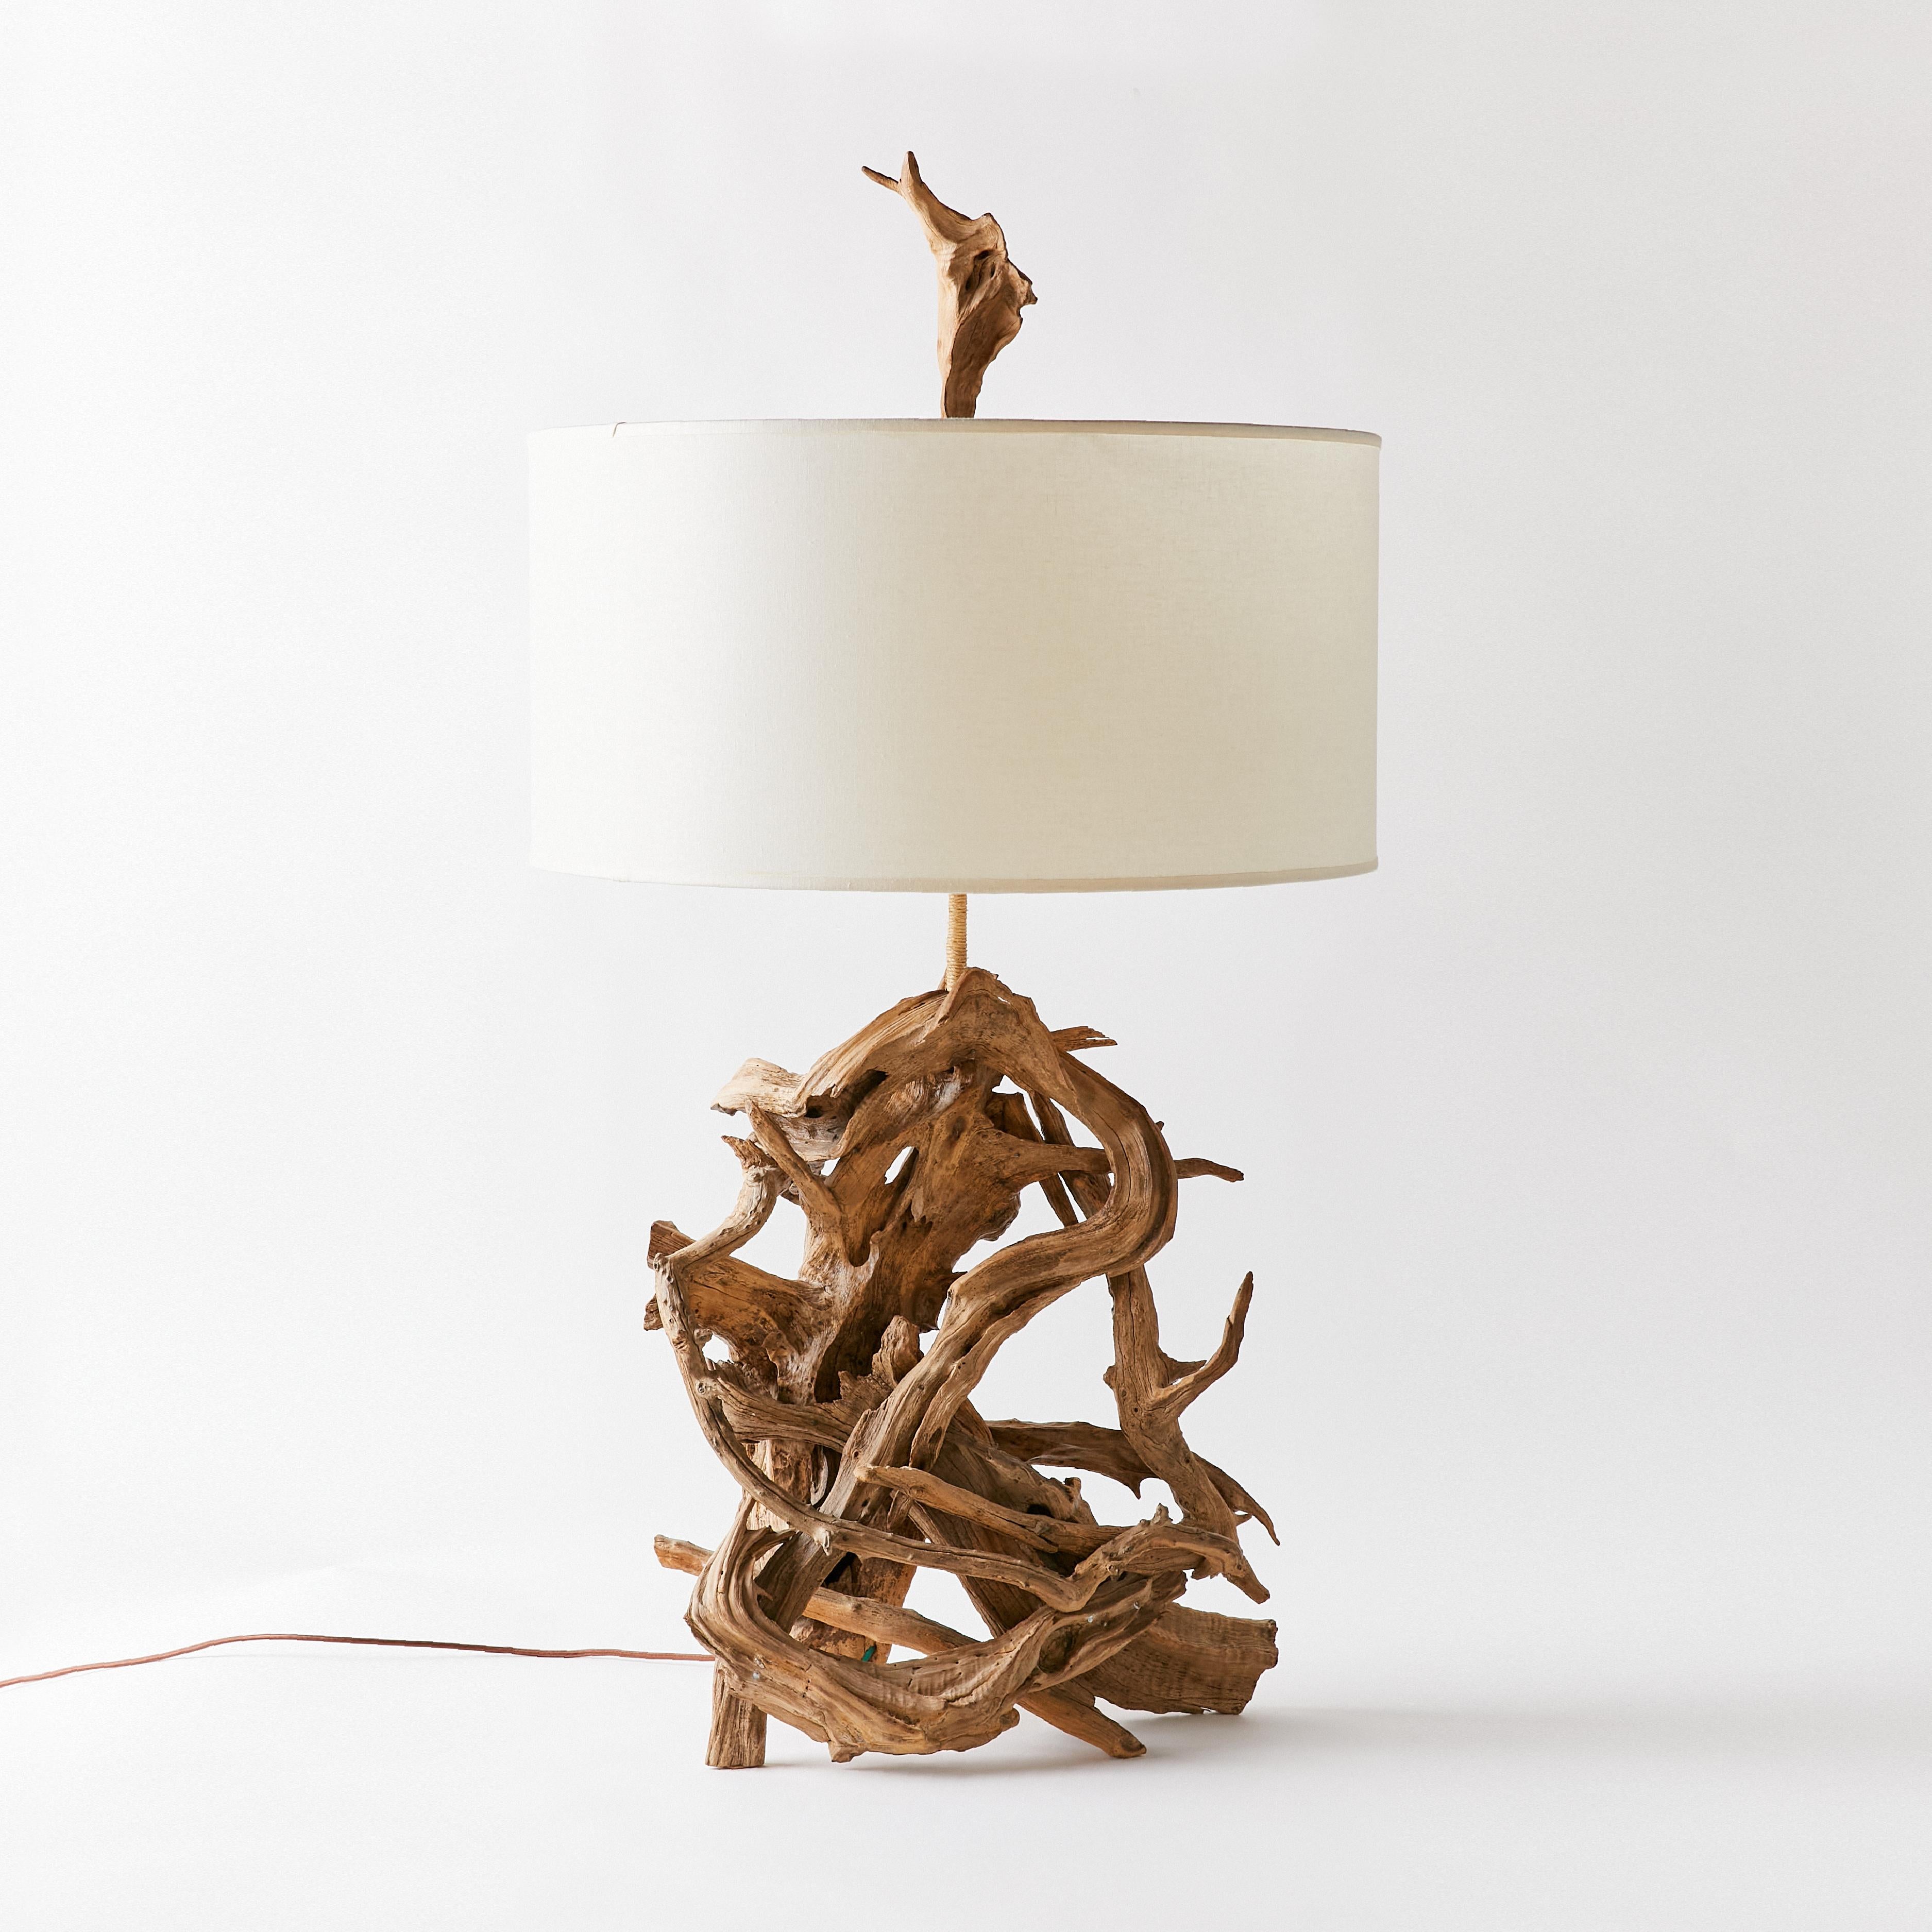 Sculptural mid-century driftwood lamp with its original well-worn natural patina.
This item comes with its original driftwood finial.